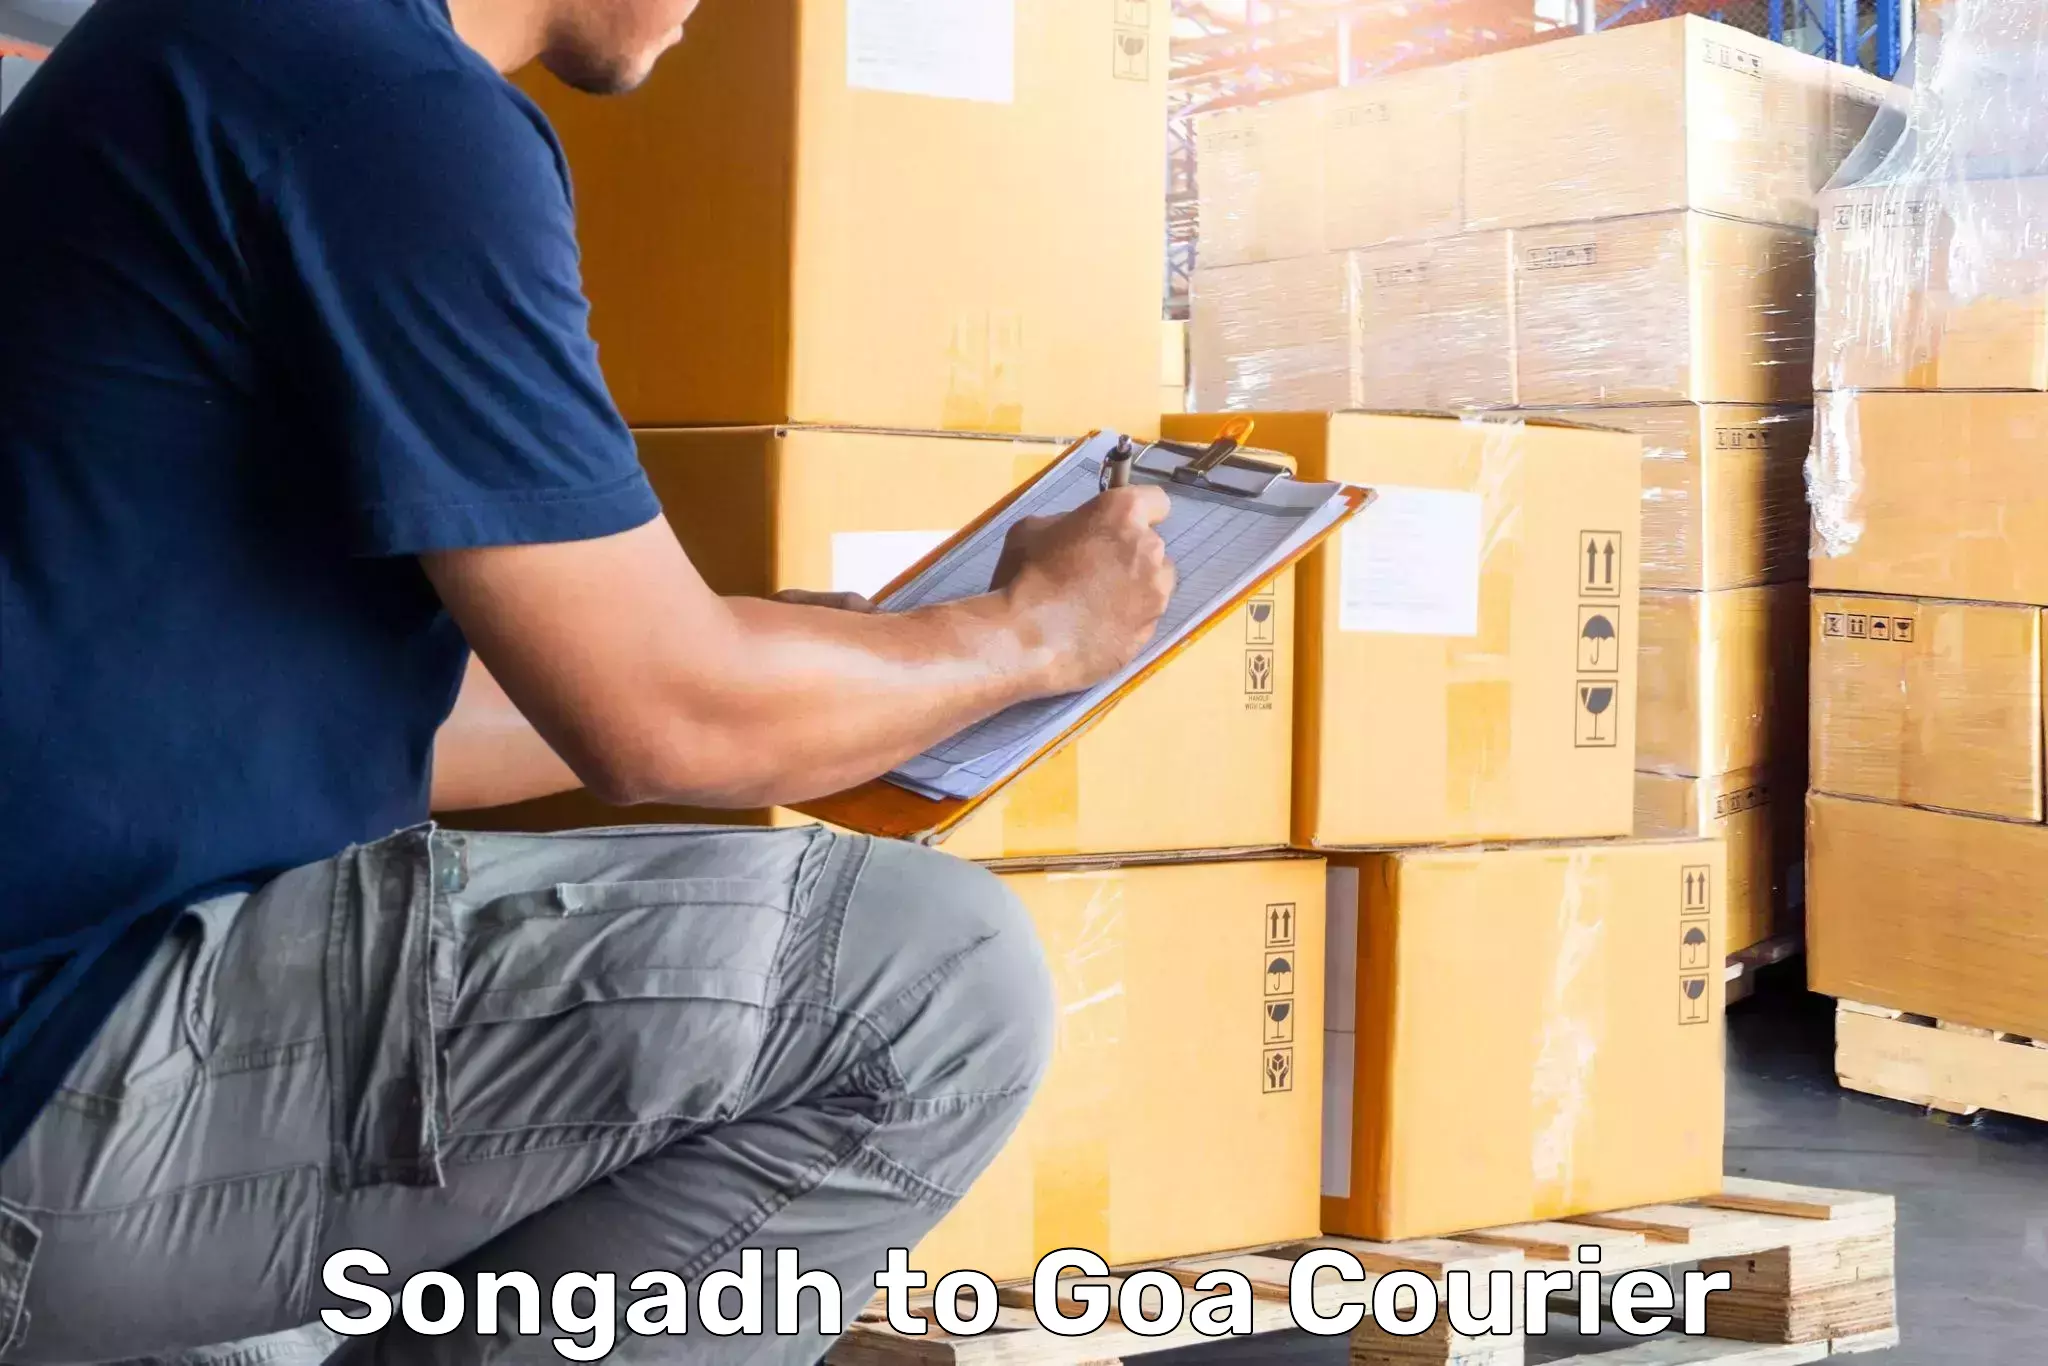 Luggage shipment processing Songadh to South Goa